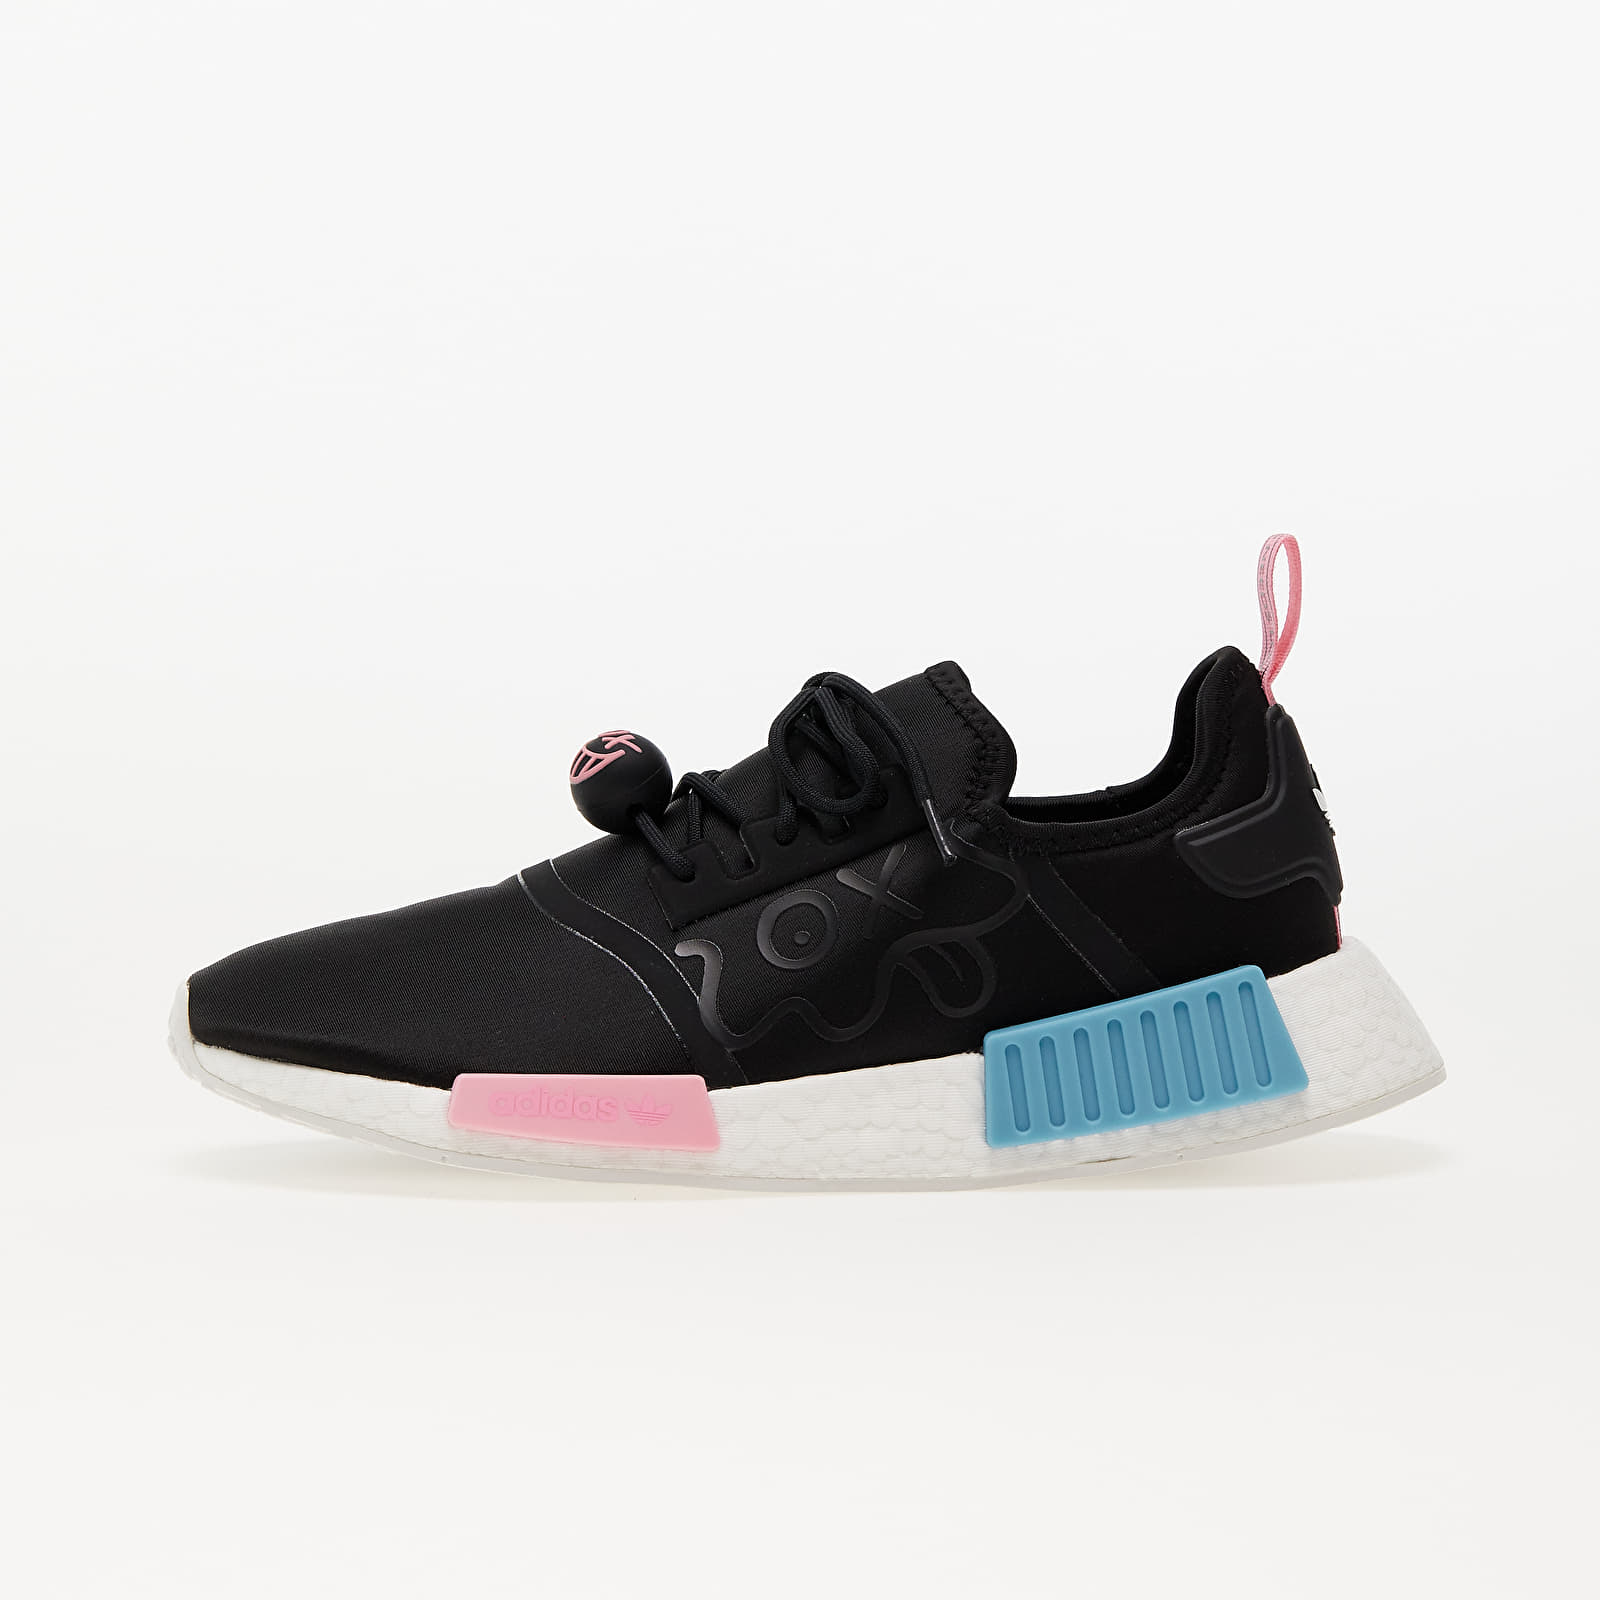 Men's sneakers and shoes adidas Originals NMD_R1 Core Black/ Ftw White/ Core Black